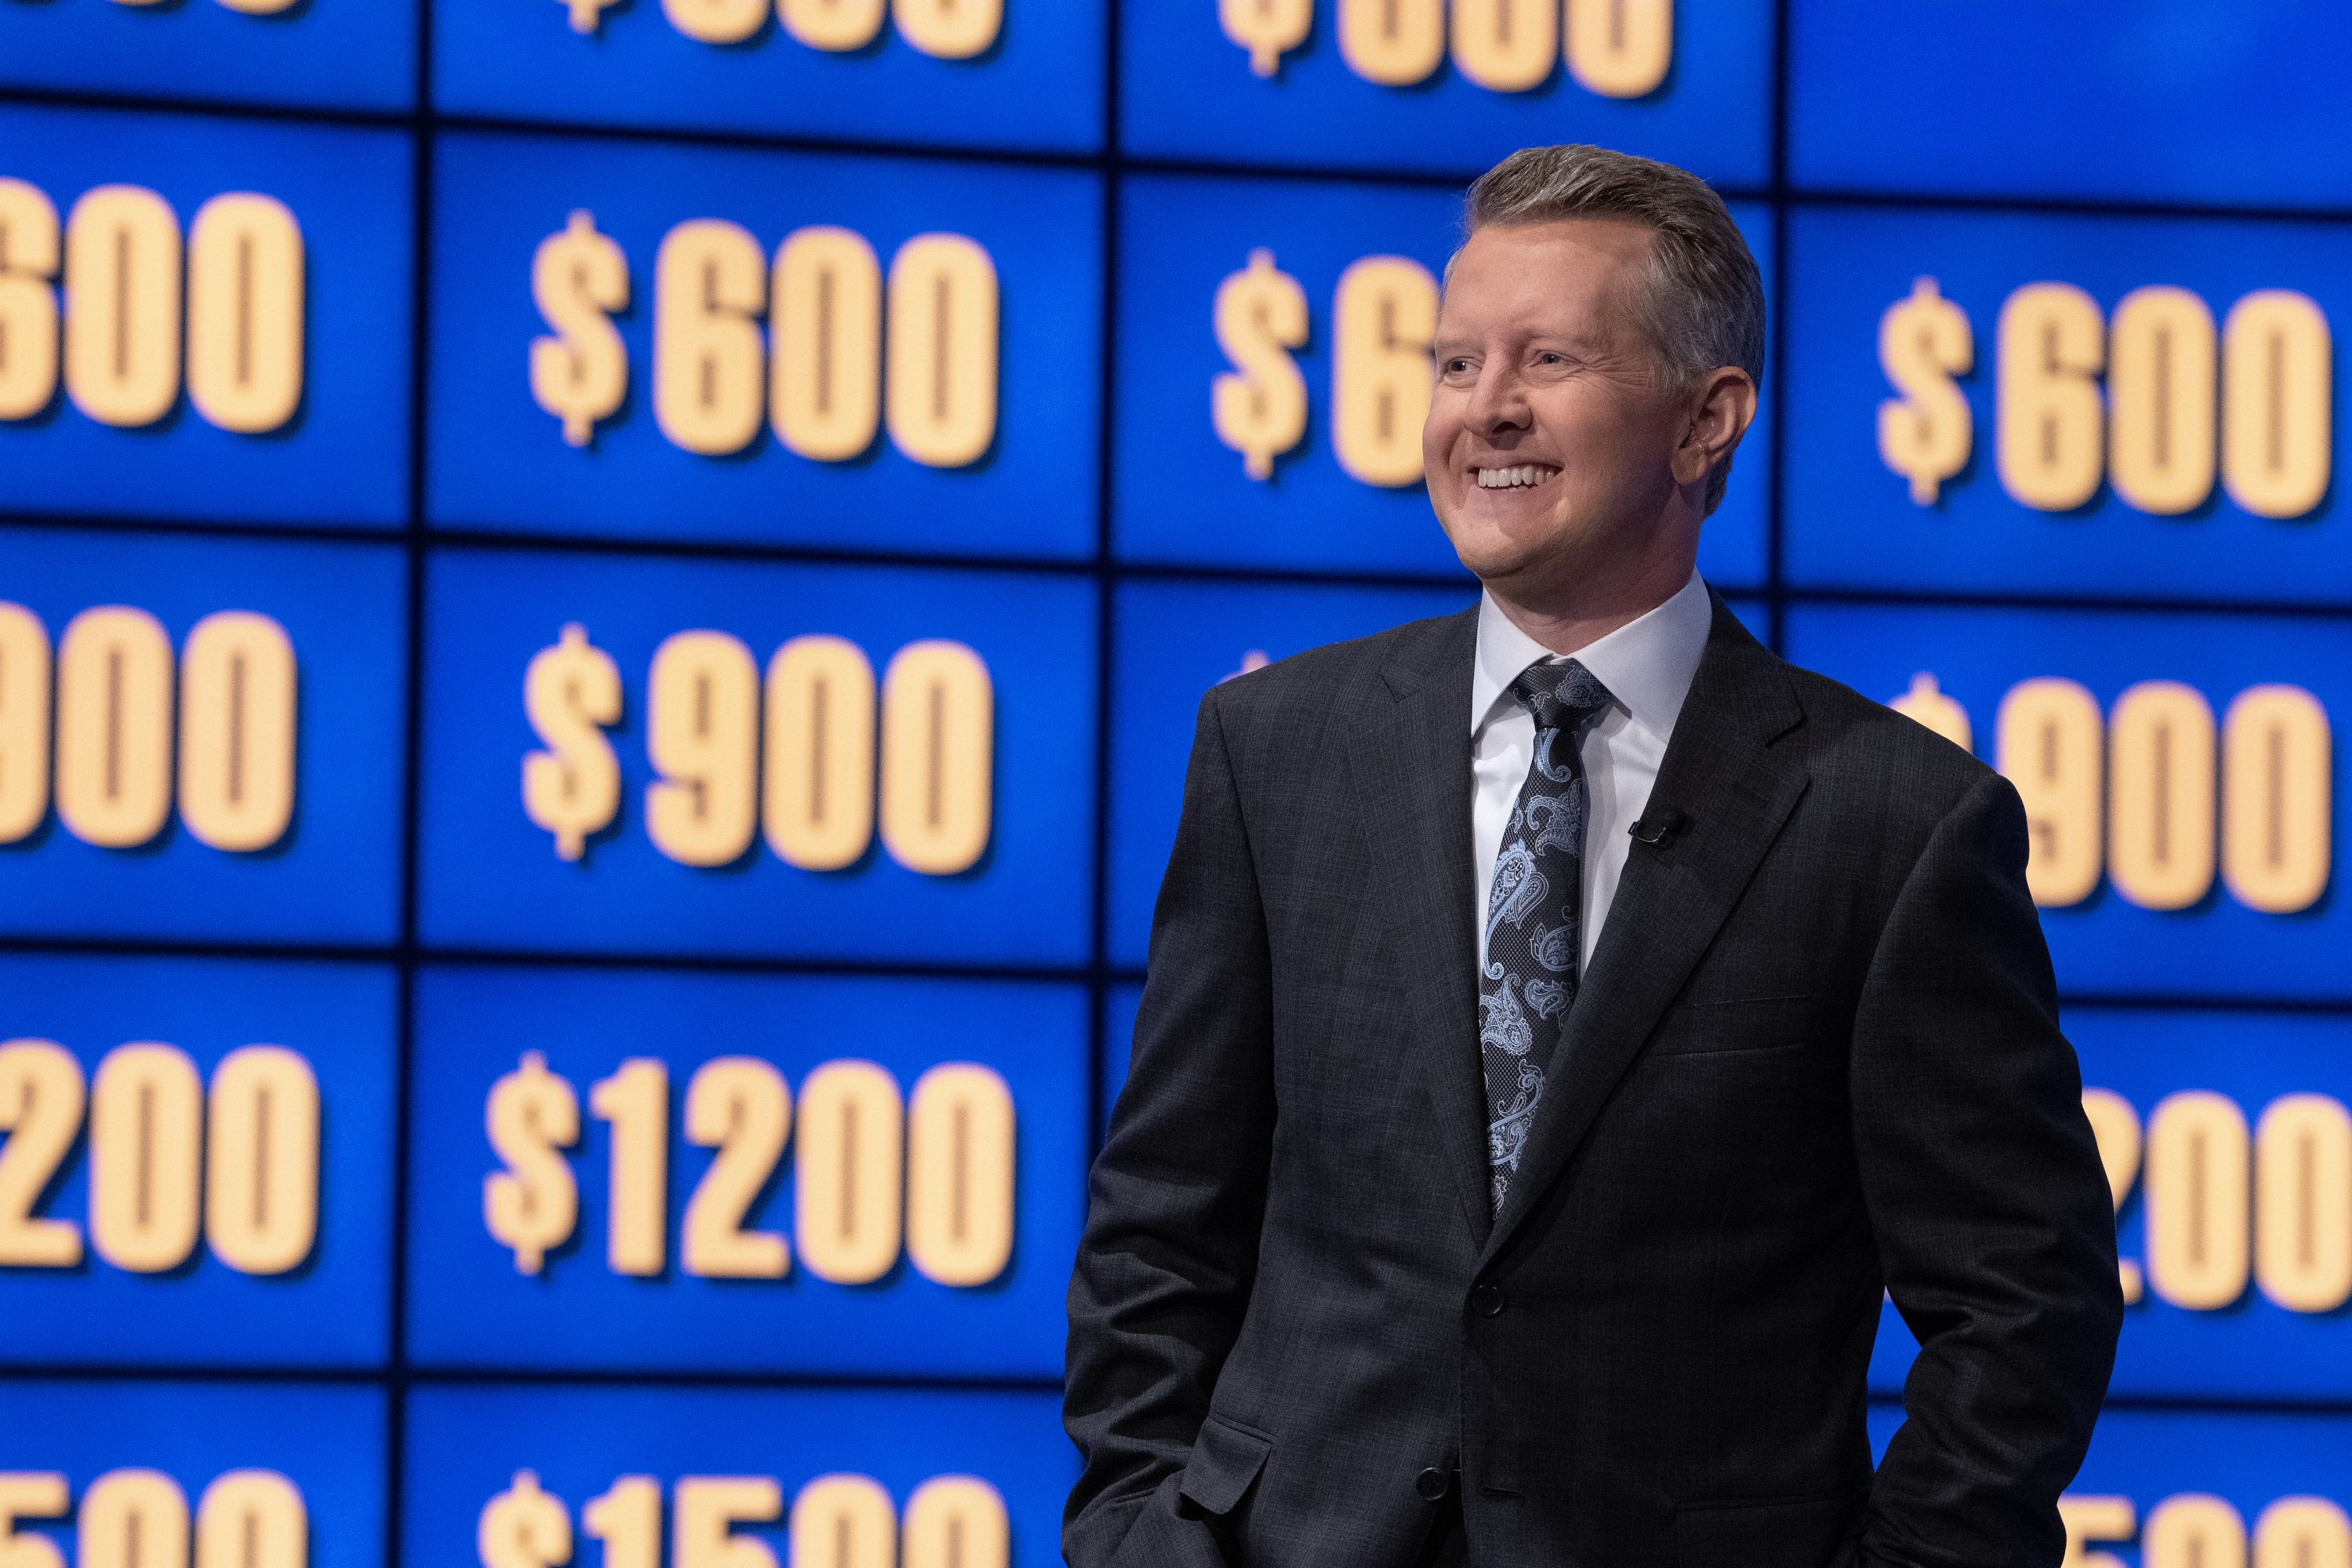 Ken in a suit and tie on Jeopardy smiling